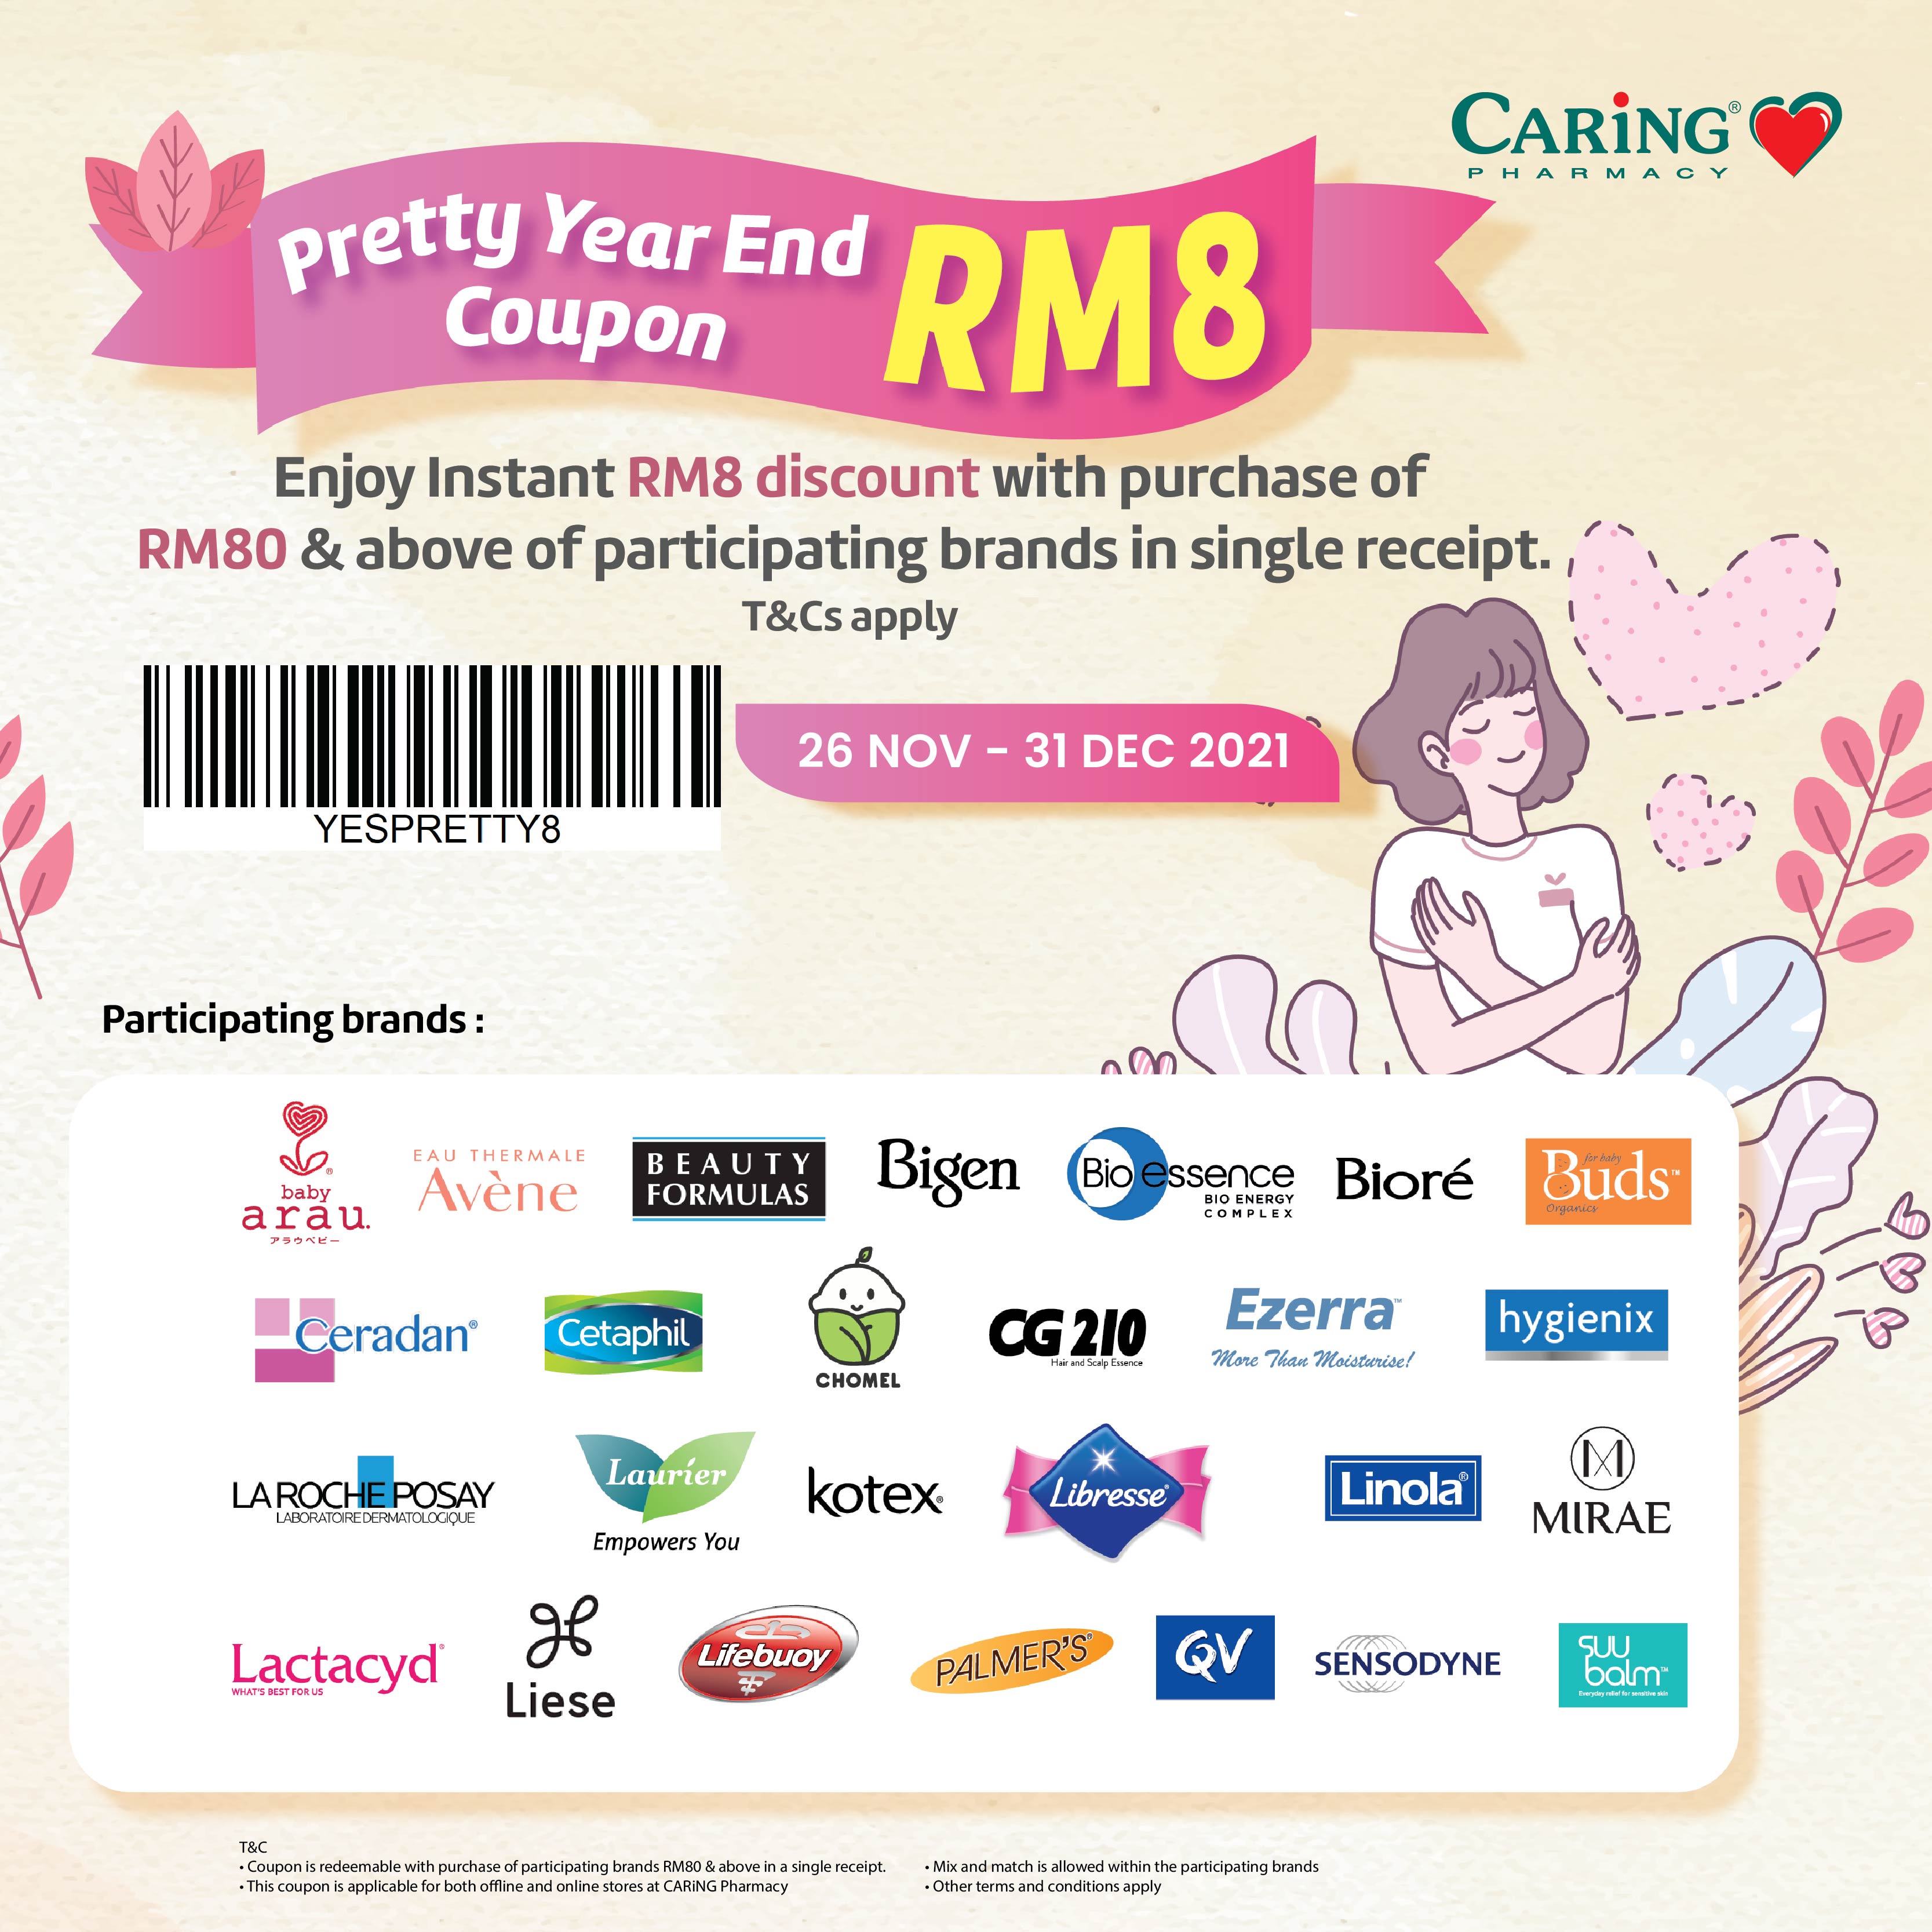 PRETTY YEAR END COUPON RM8